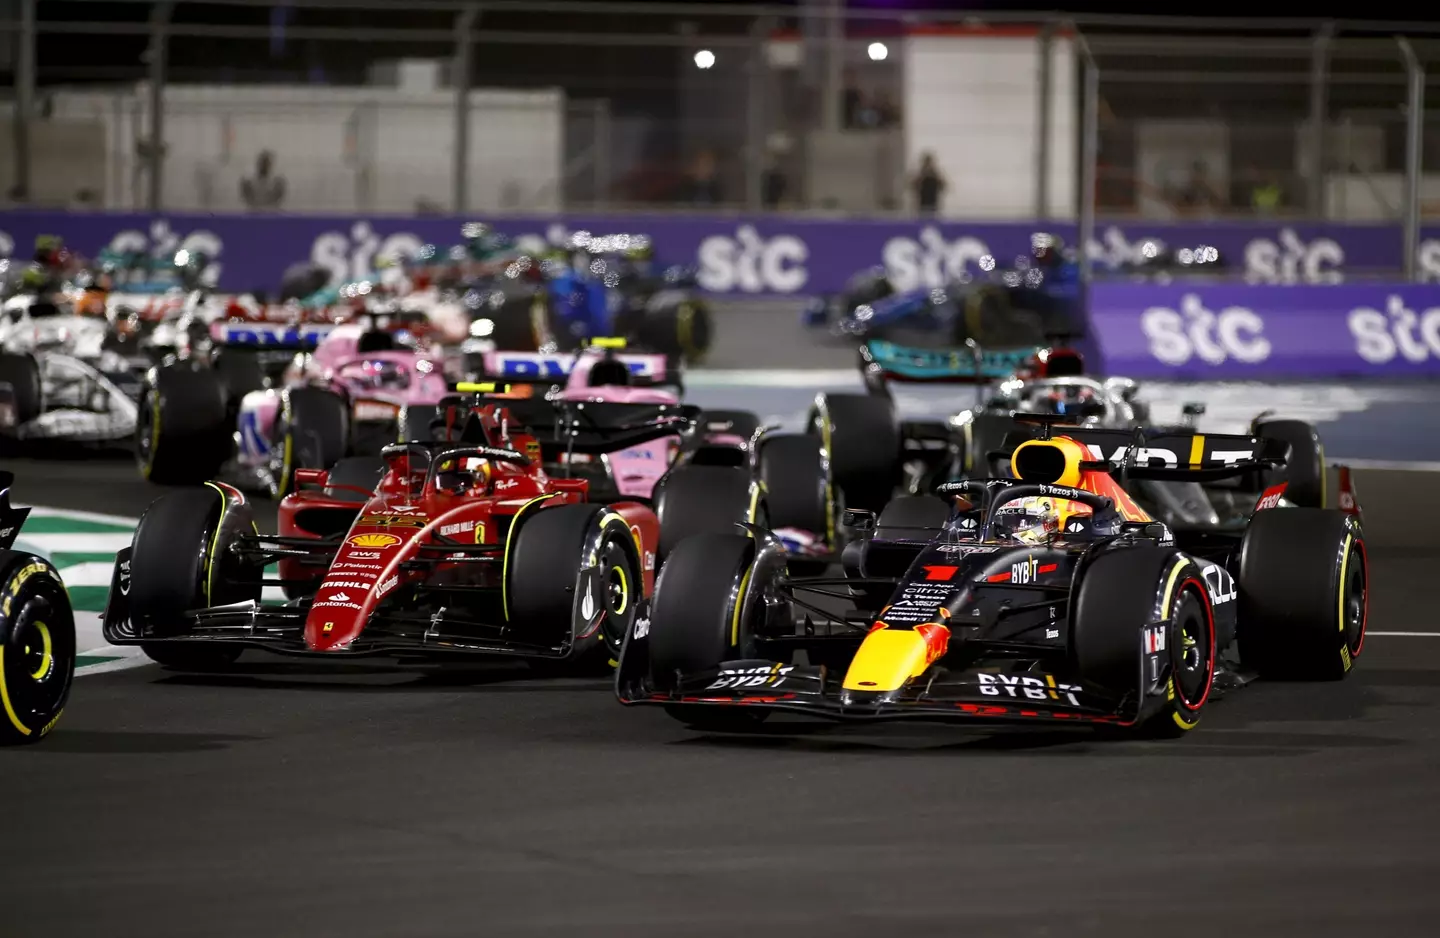 Verstappen is battling with Ferrari and Leclerc this season, not Mercedes and Hamilton. Image: PA Images